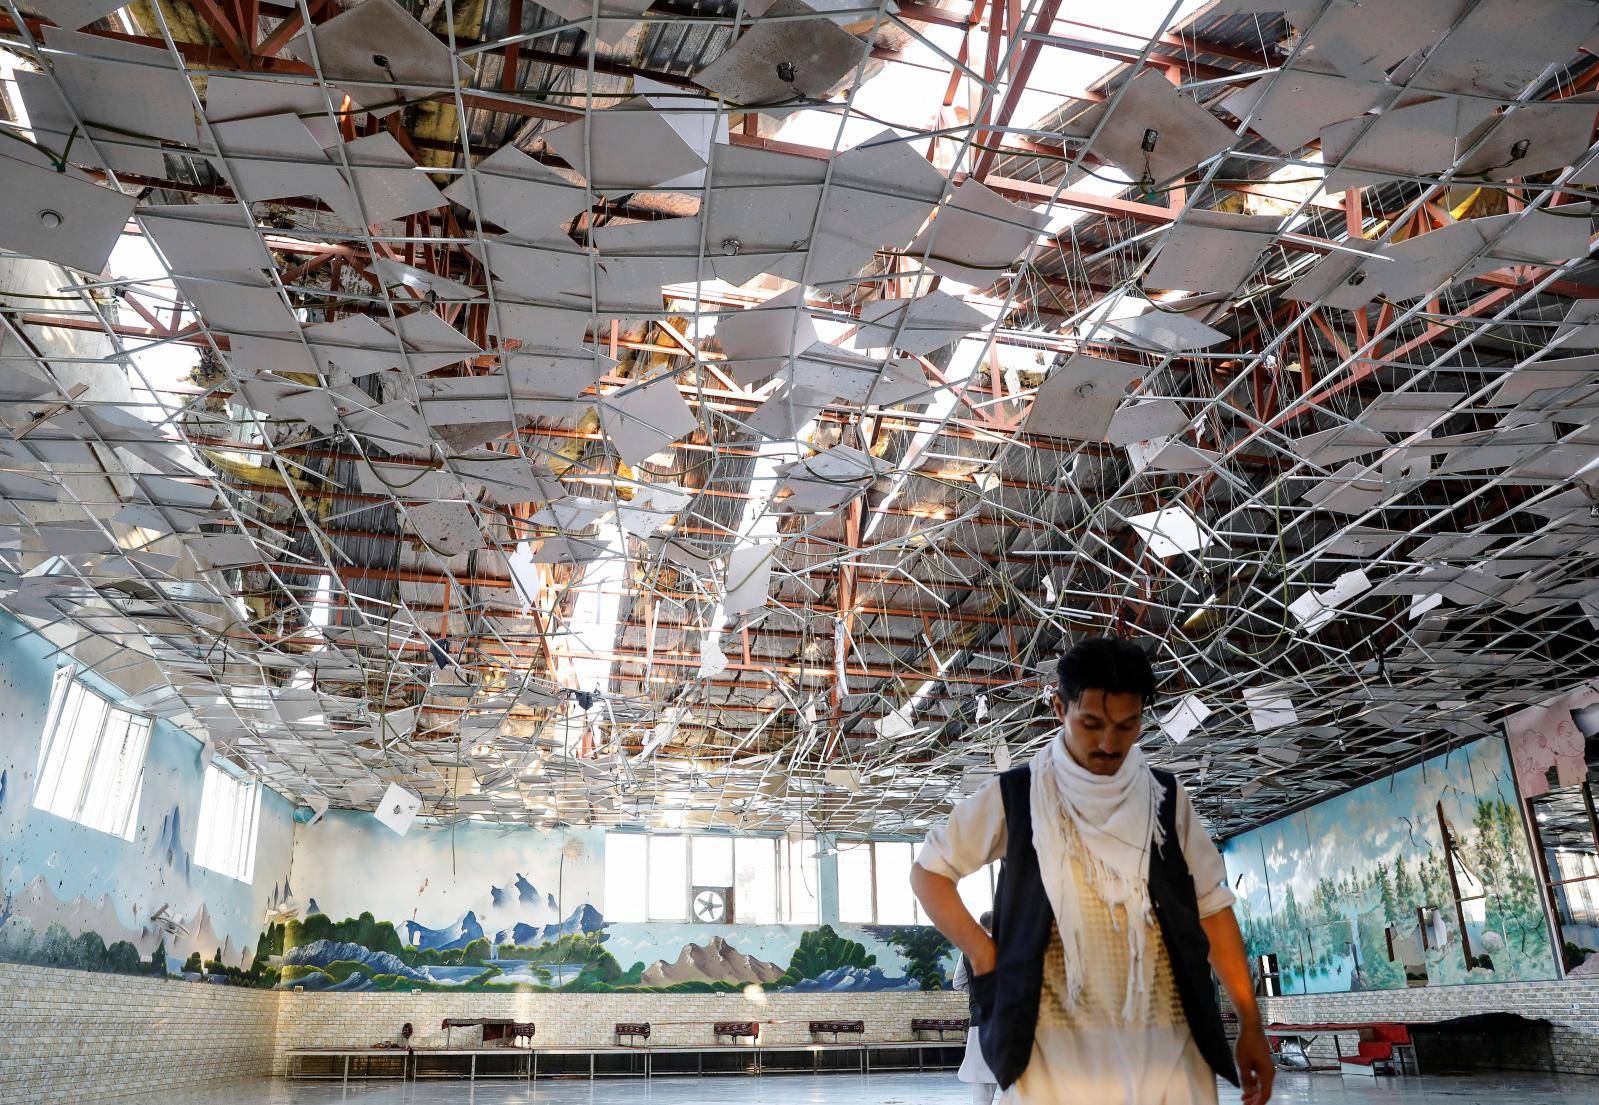 A damaged wedding hall is seen after a blast in Kabul, Afghanistan